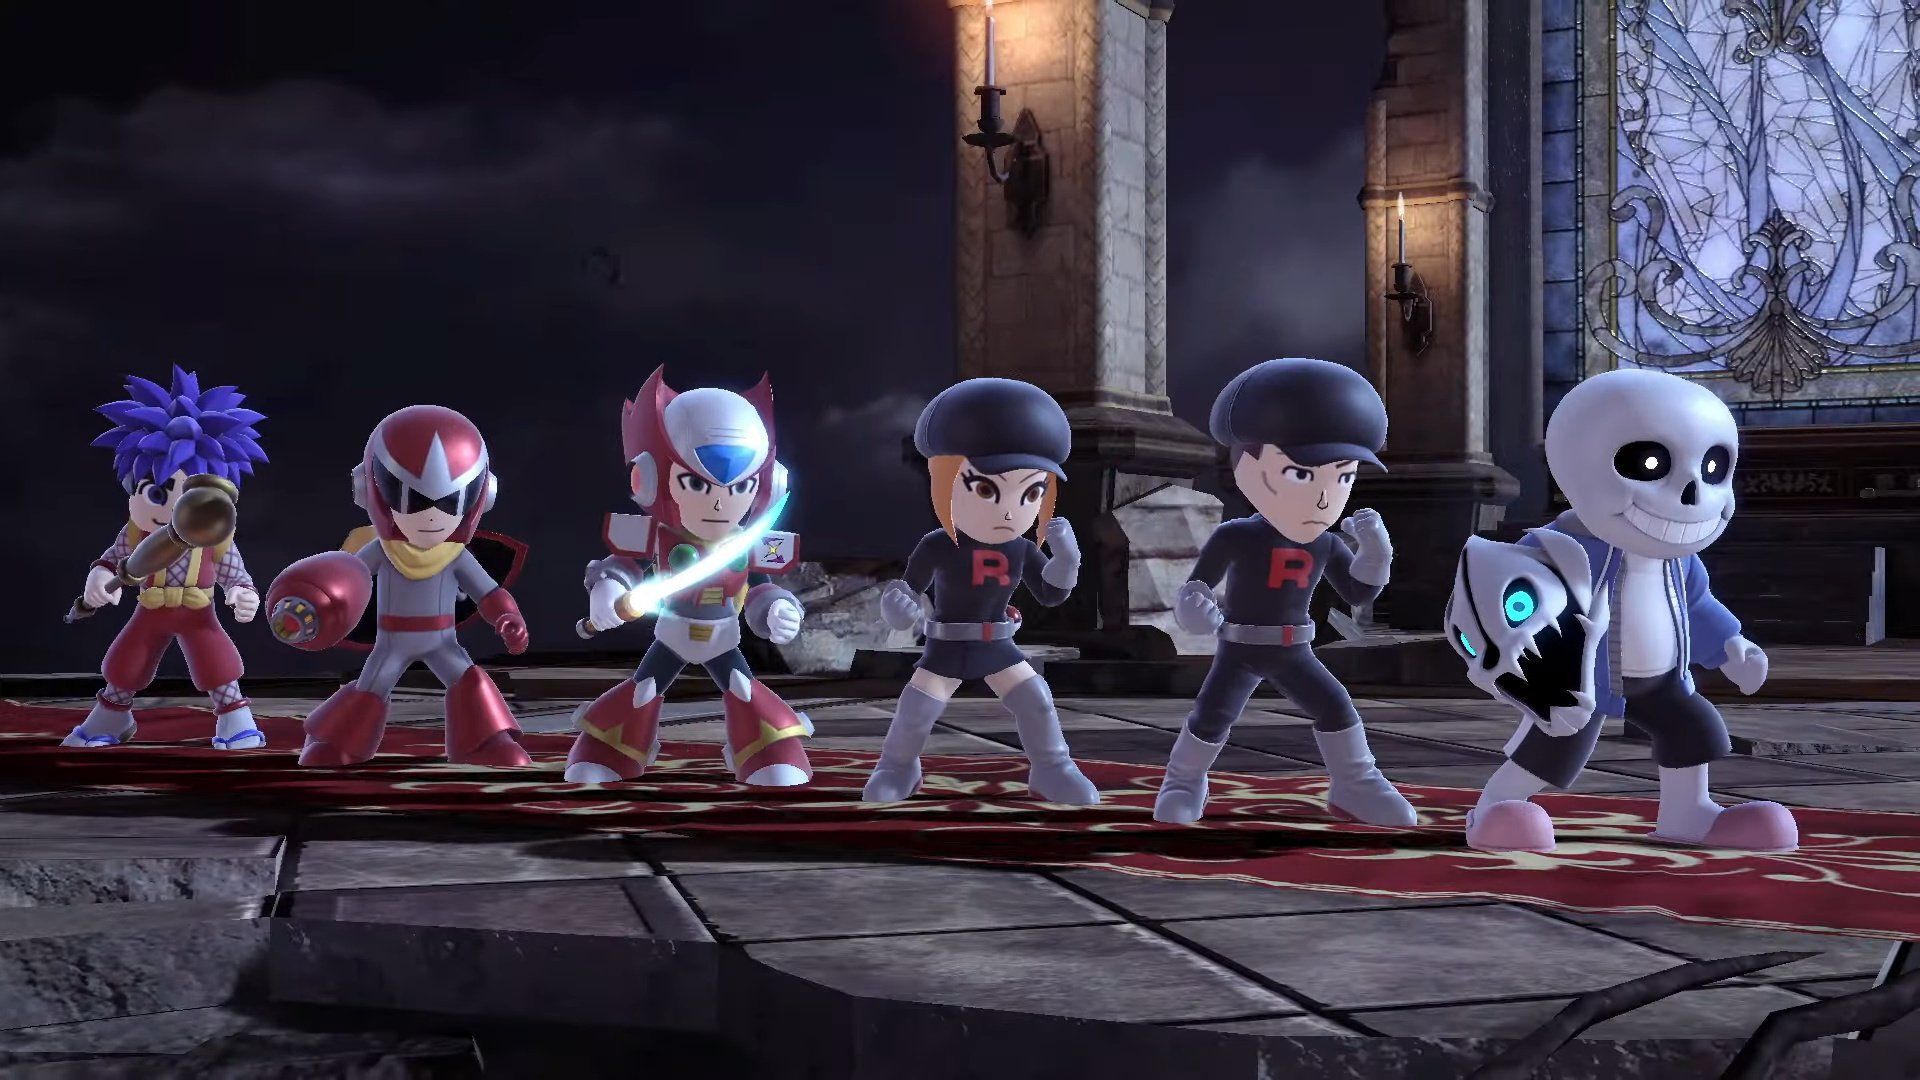 Sans From Undertale Is Coming To Super Smash Bros. Ultimate